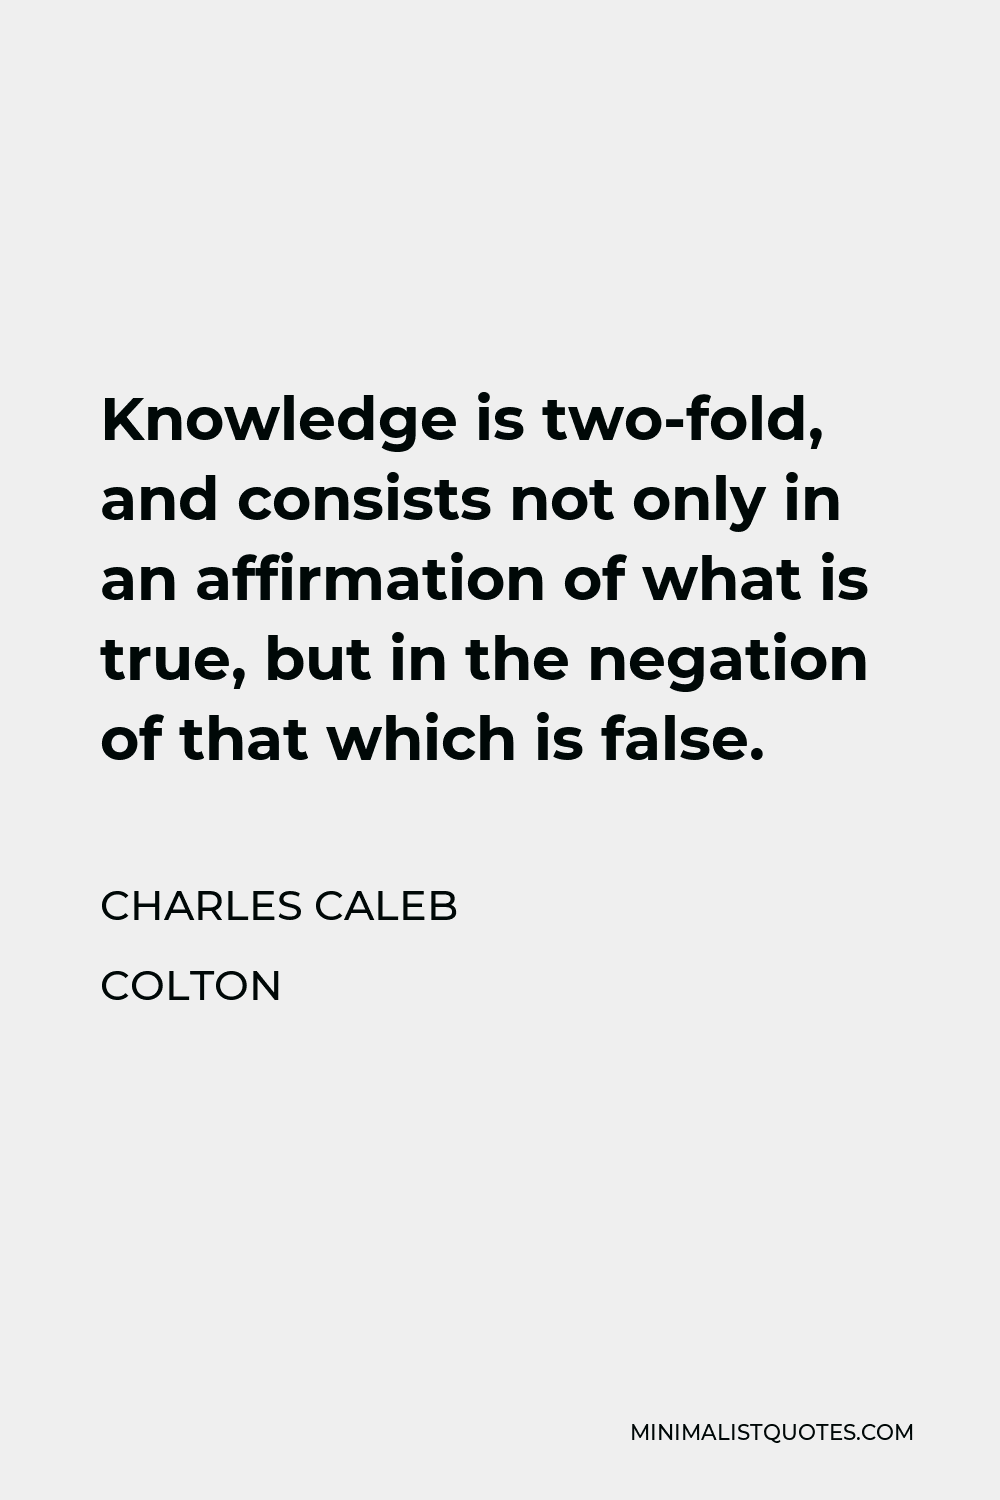 Charles Caleb Colton Quote: “Knowledge is two-fold, and consists